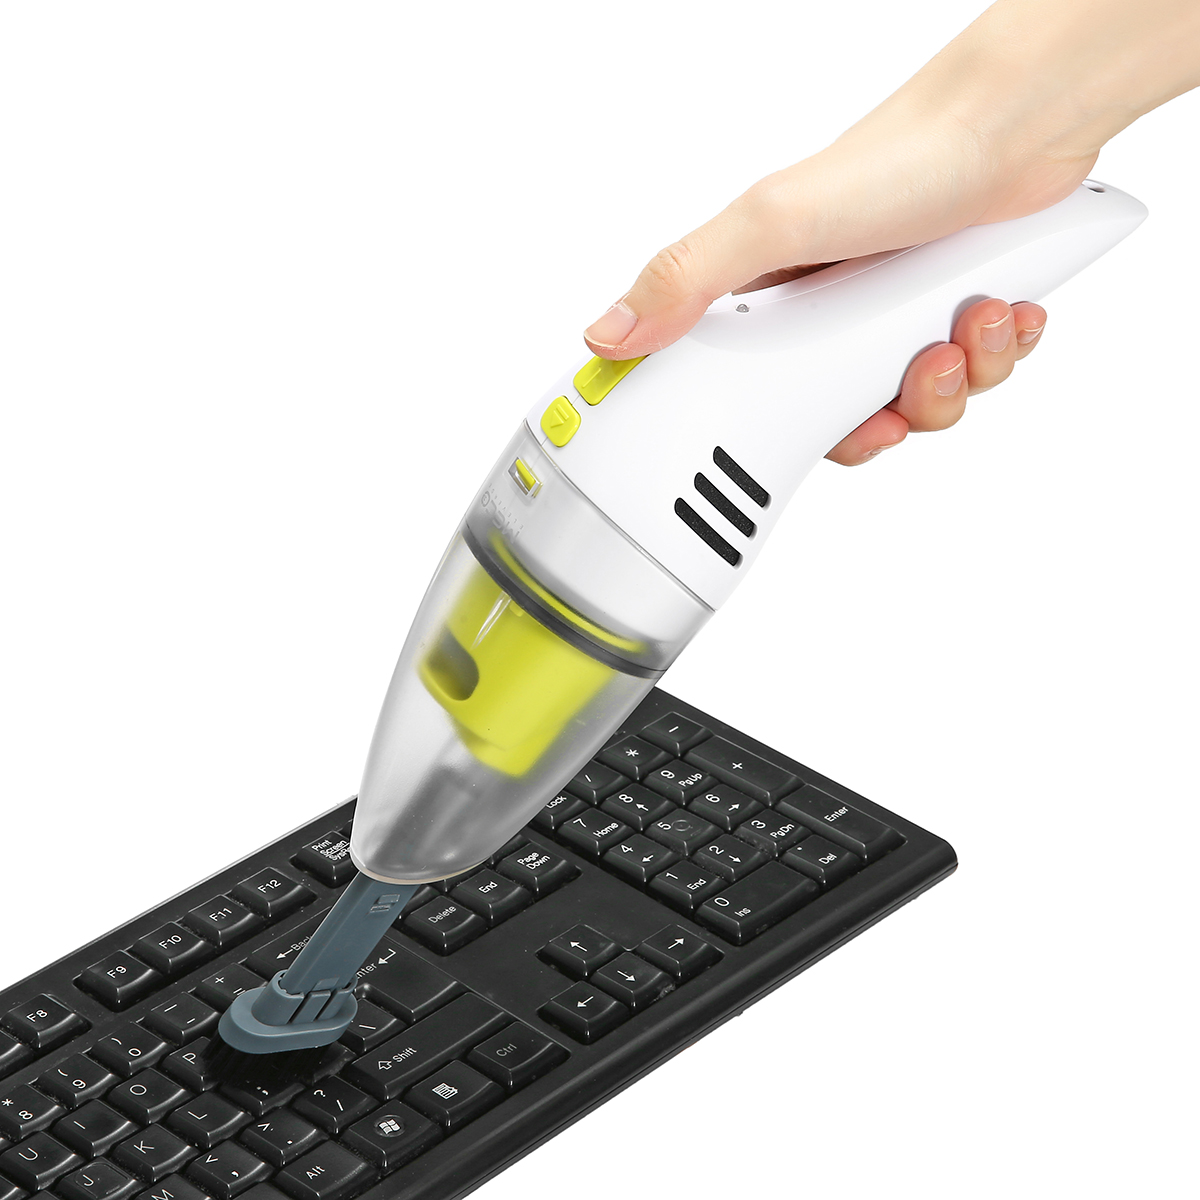 MECO Keyboard Cleaner Rechargeable Mini Vacuum Wet Dry Cordless Desktop Vacuum Cleaner for Cleaning Dust Hairs Crumbs Scraps